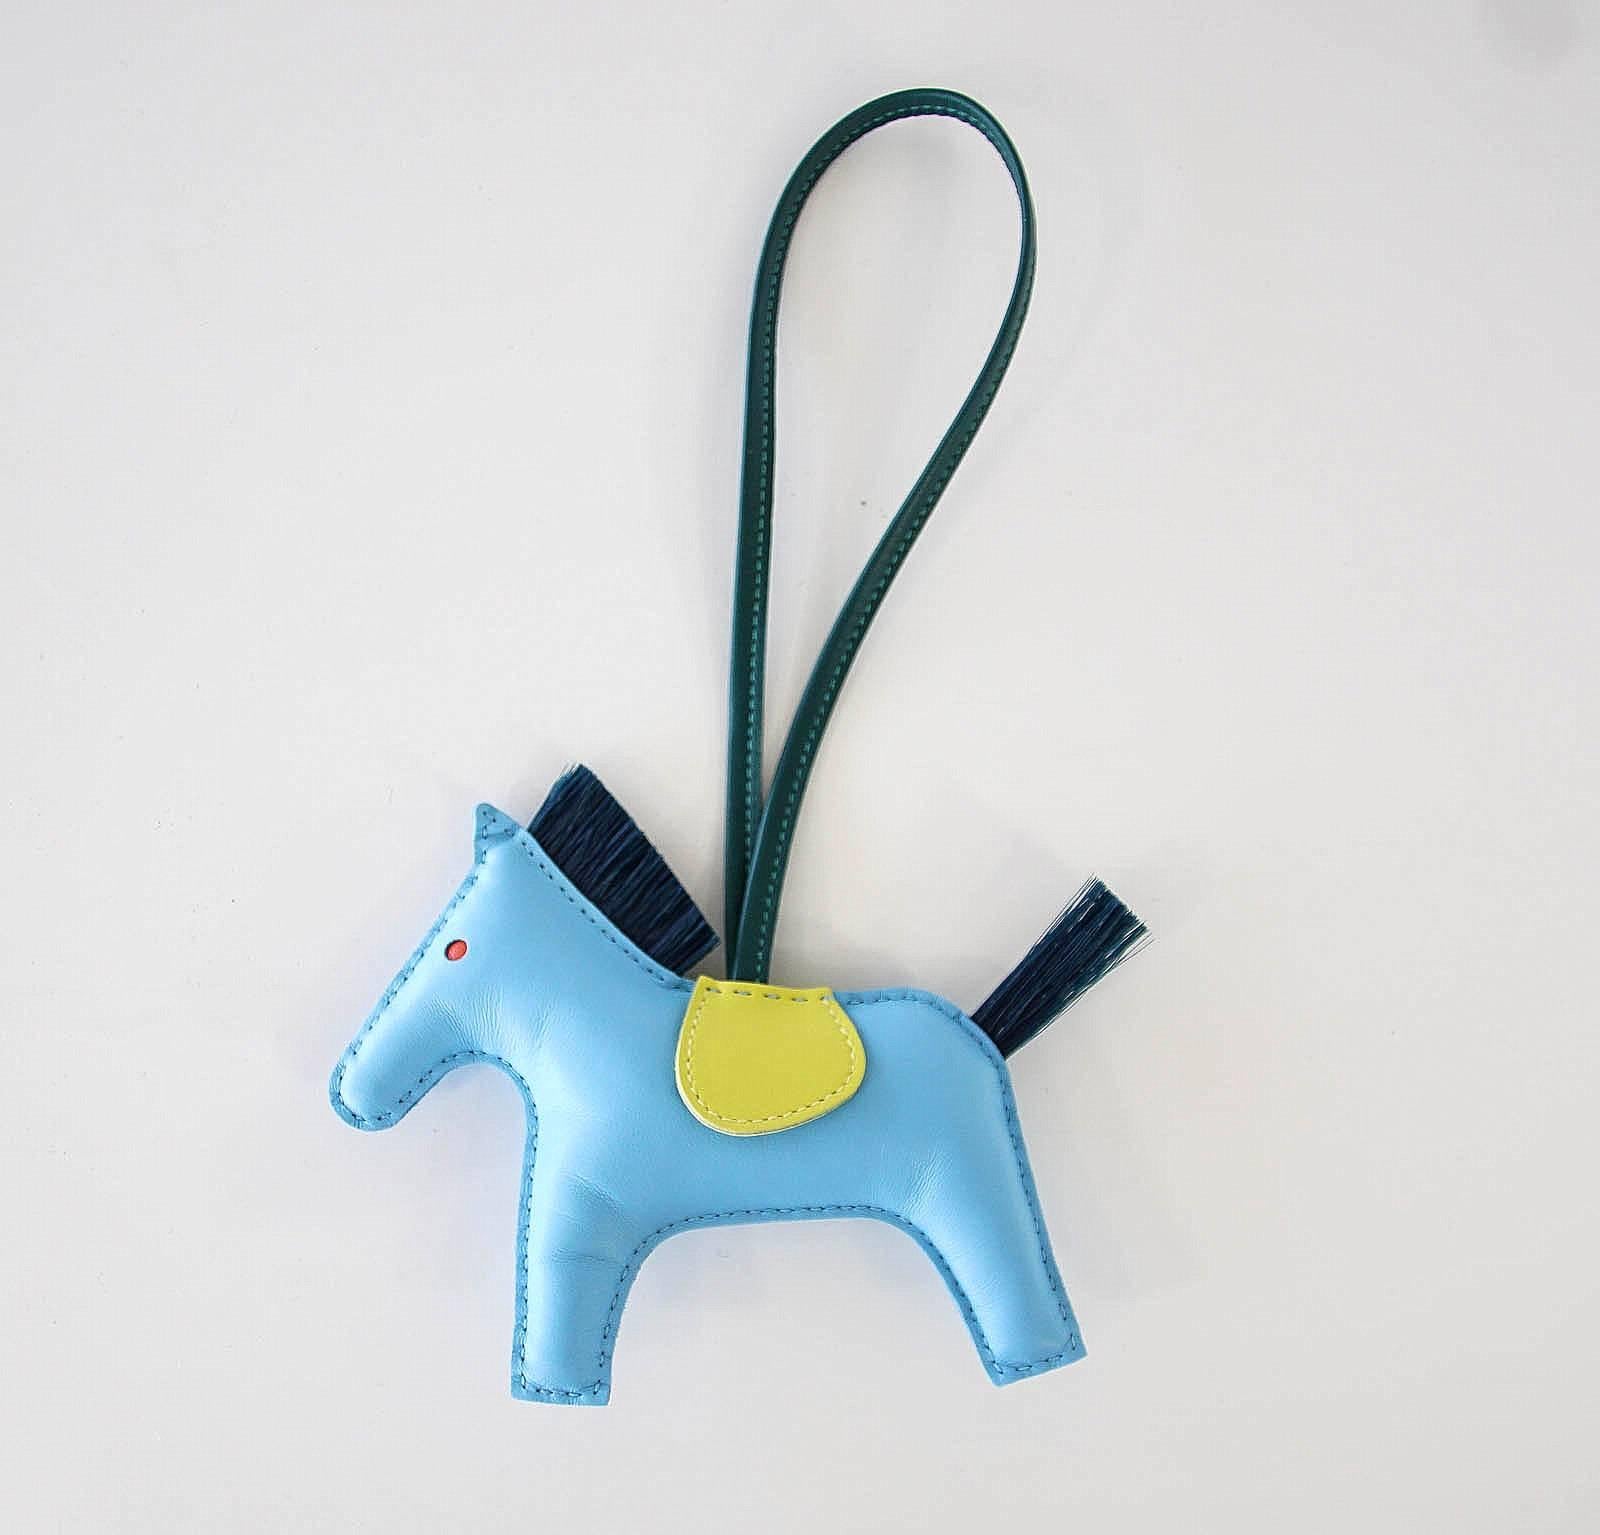 Guaranteed authentic HERMES Limited Edition Rodeo MM horse bag charm with genuine horsehair tail and mane
Body is Blue Celeste with Lime saddle and Malachite tail and mane.
Skin is lamb Milo.  
Signature HERMES PARIS MADE IN FRANCE is stamped under